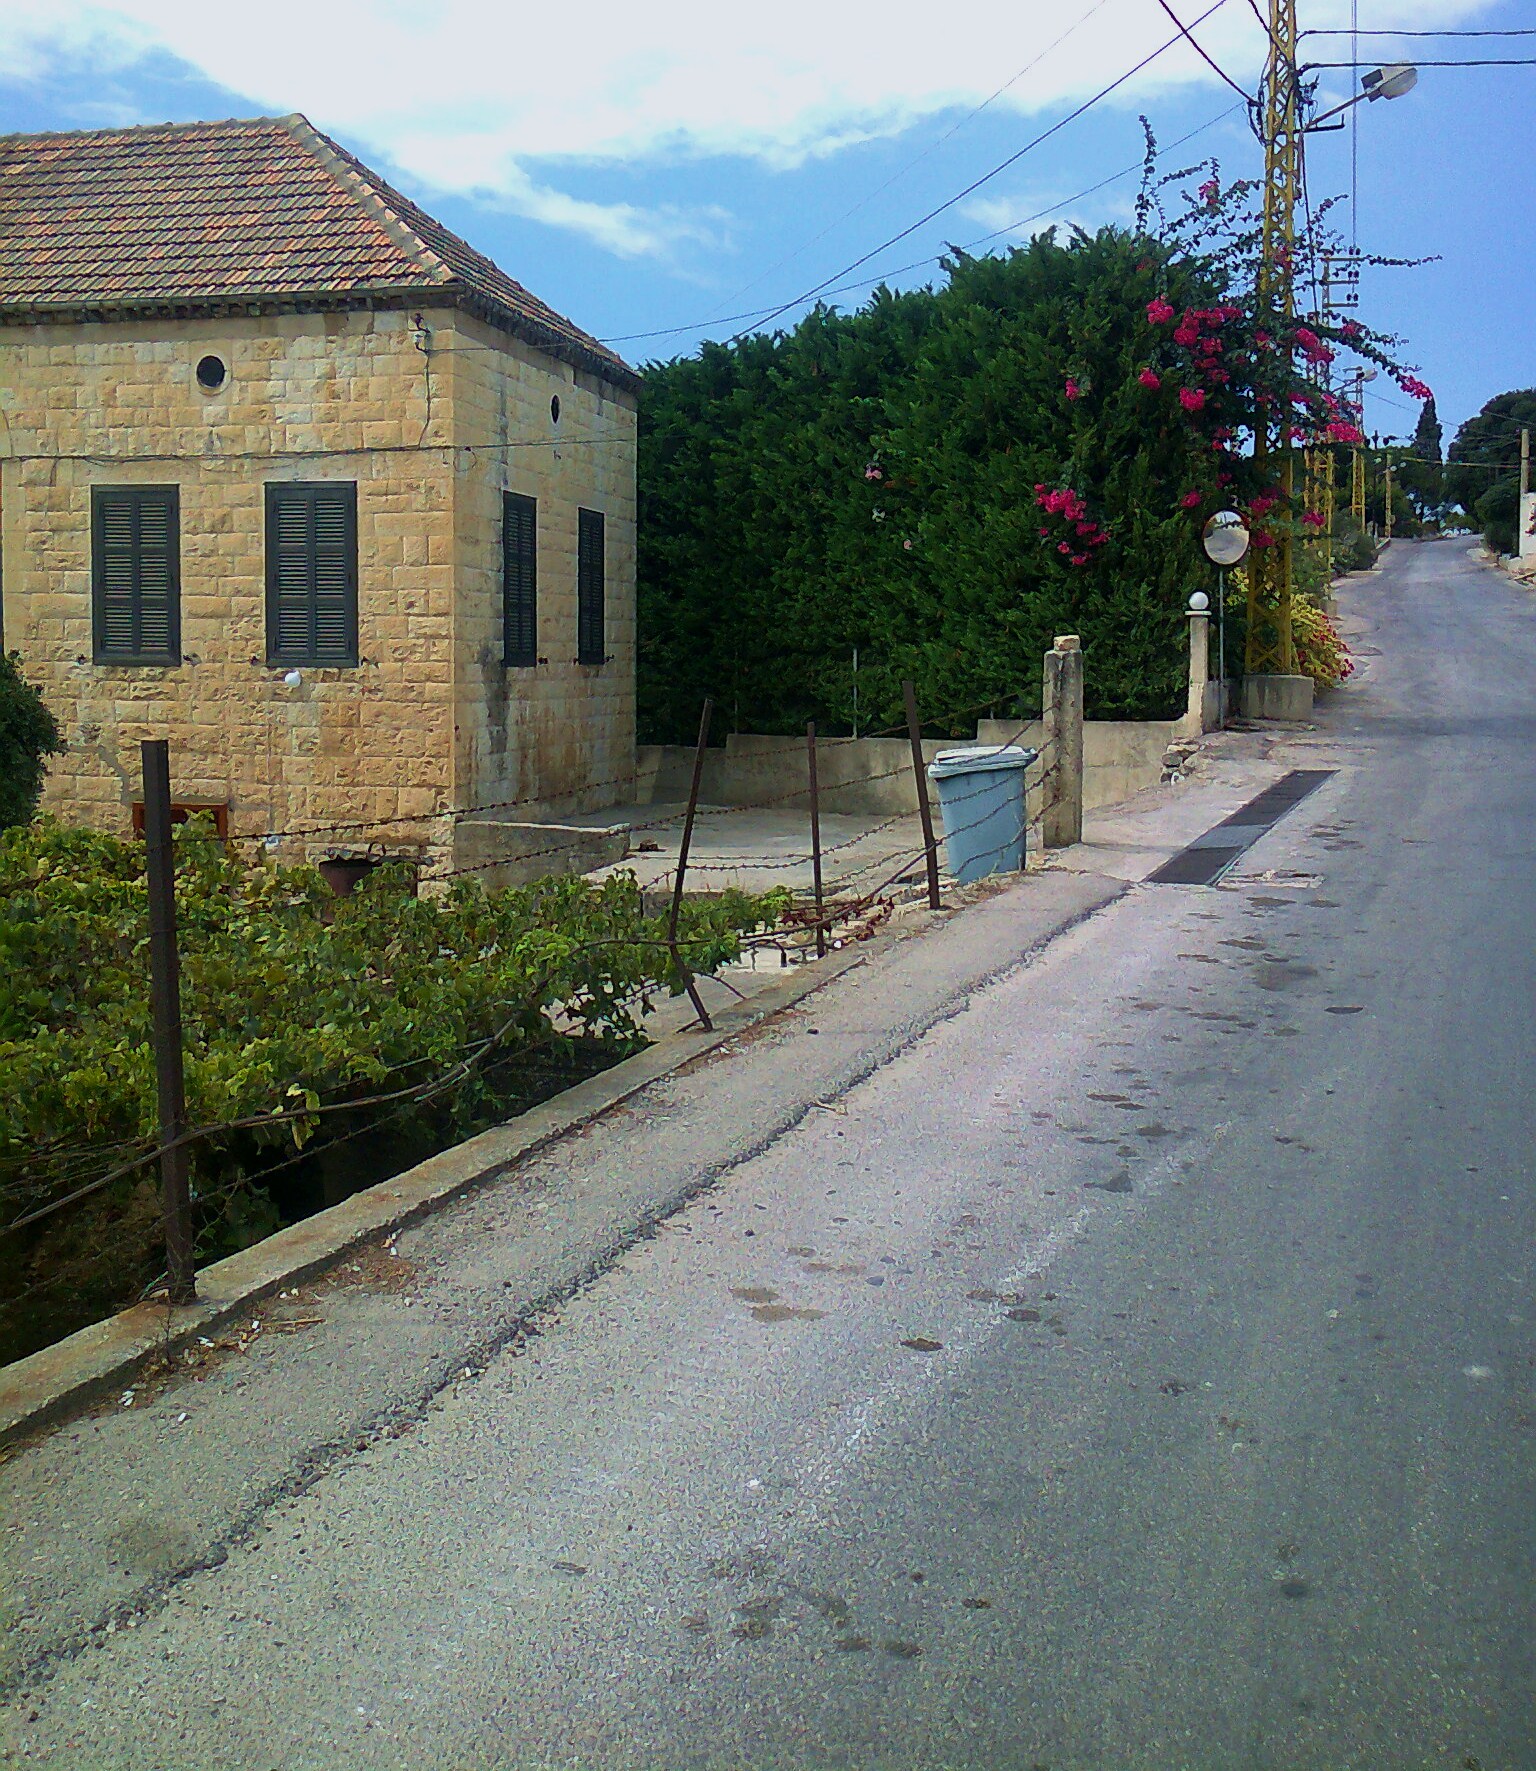 the street in the old village is empty